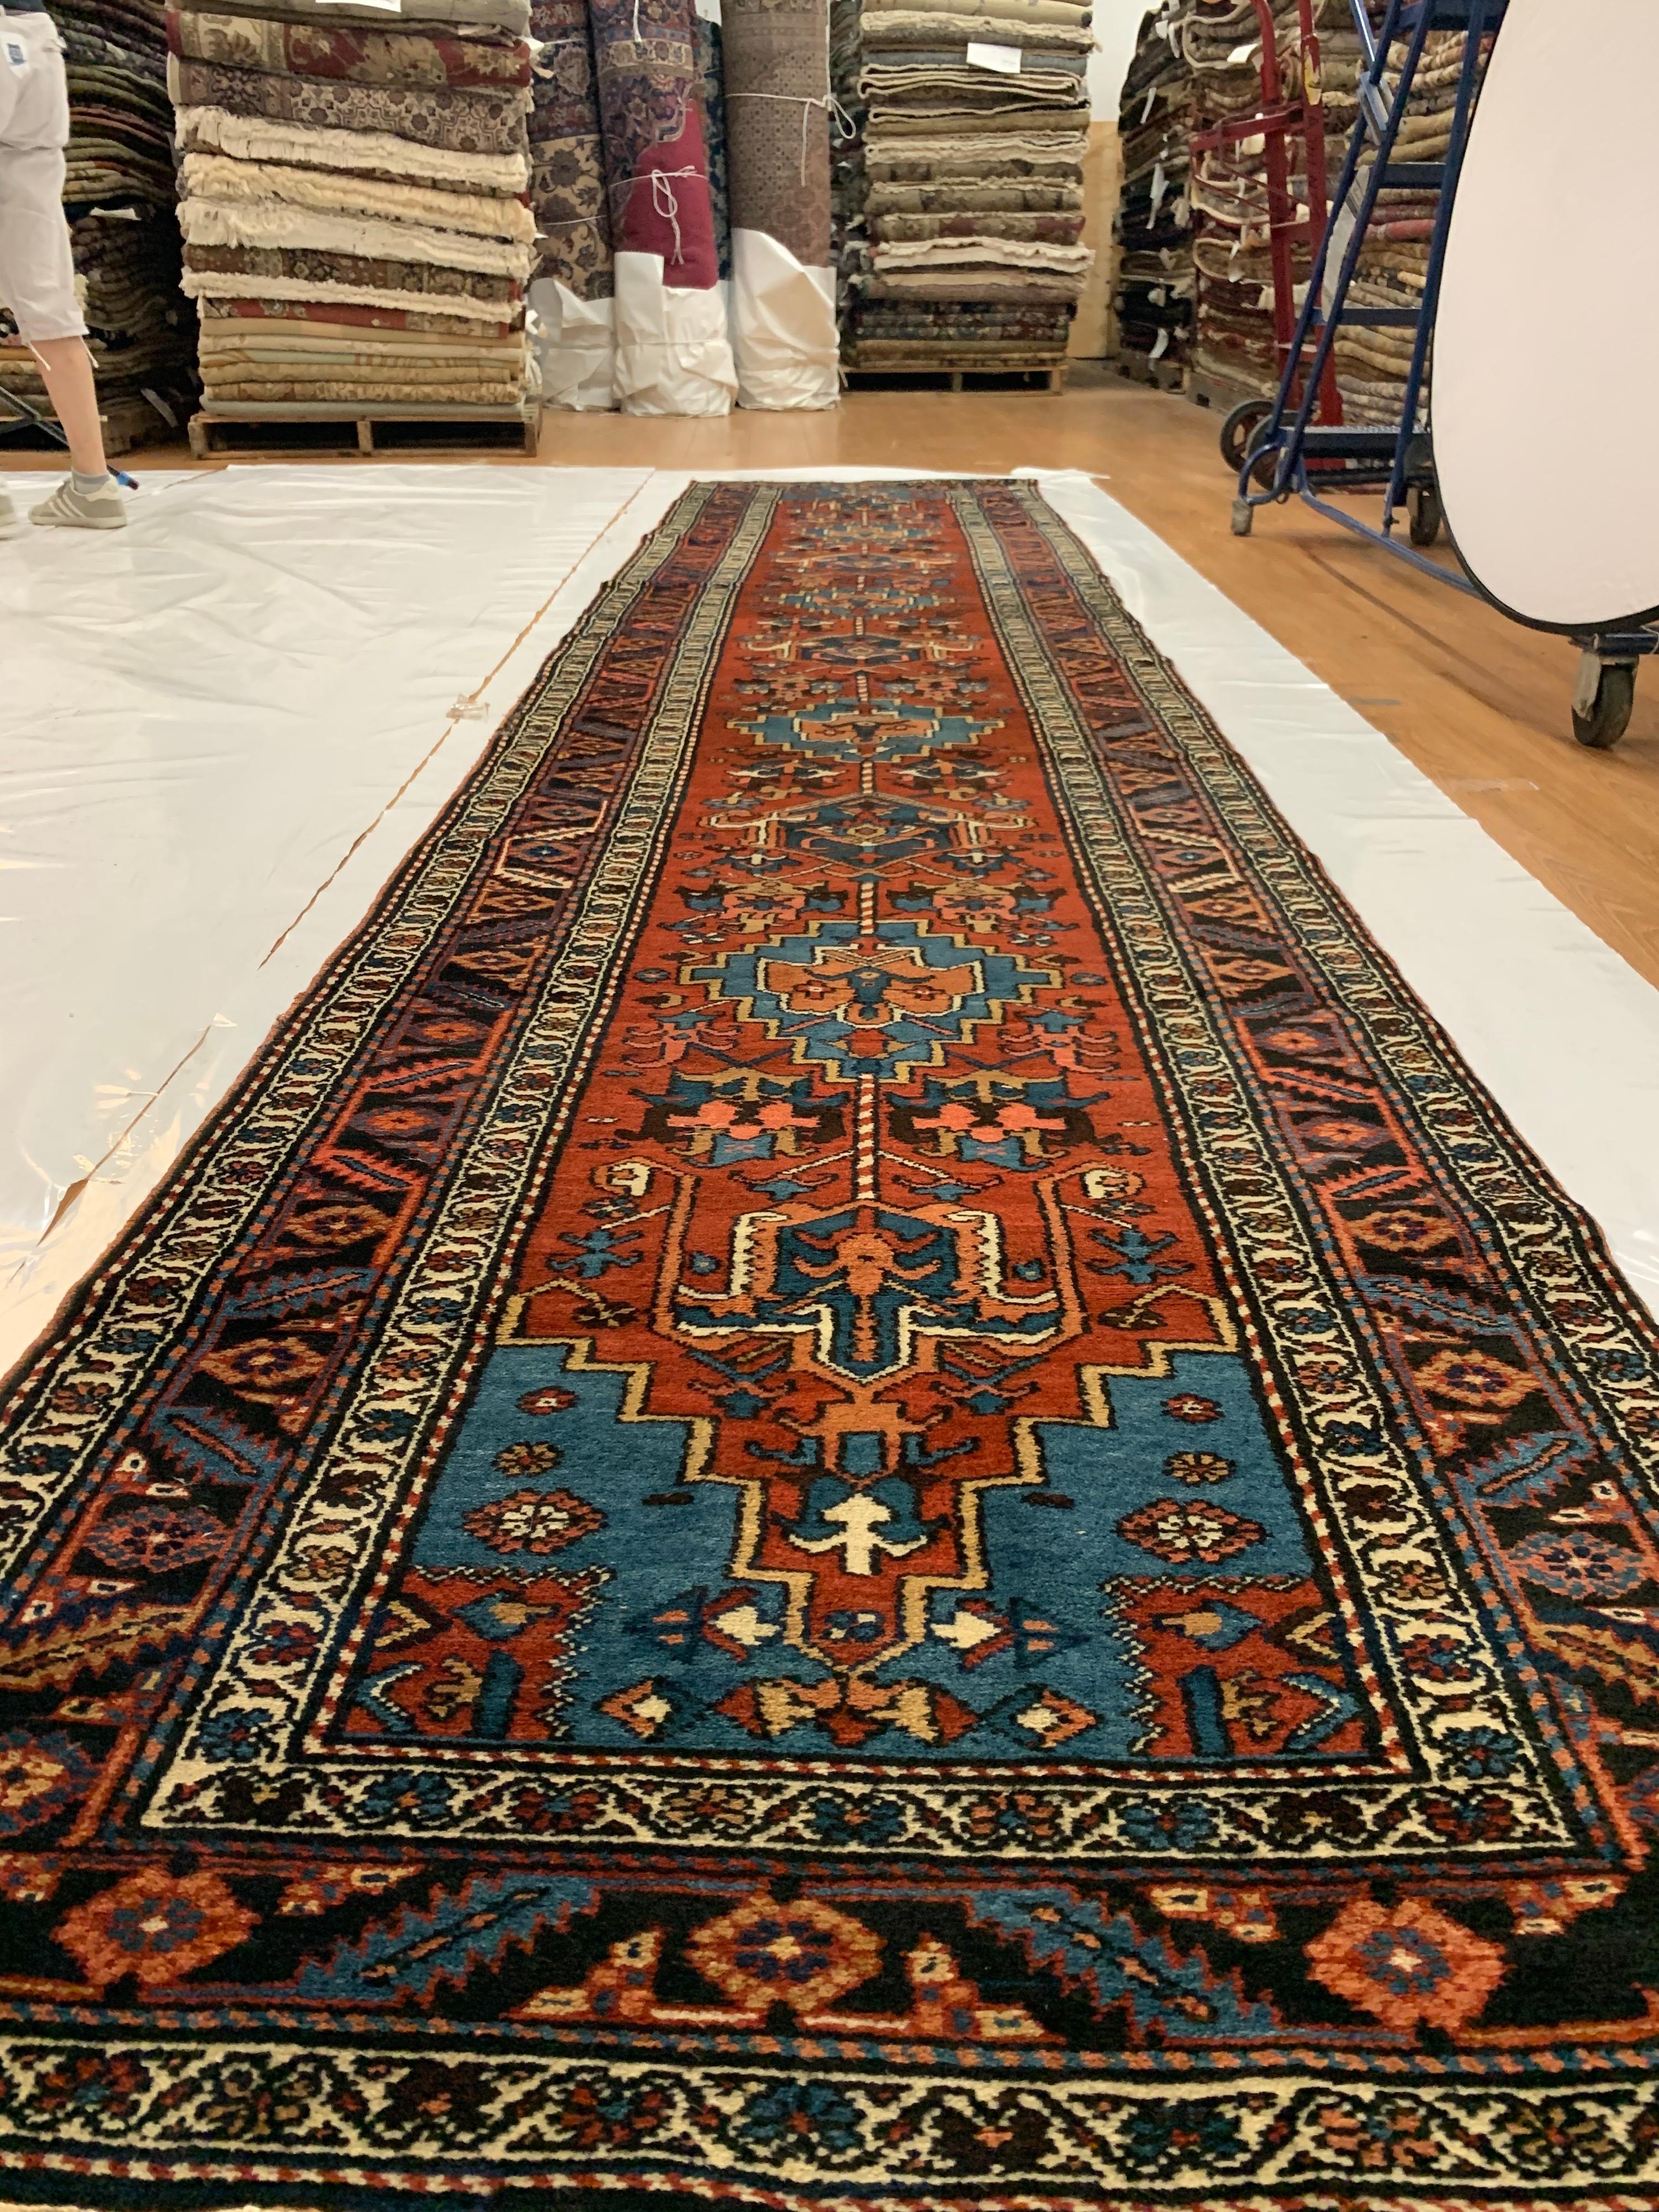 Hand-Knotted Antique Persian Burgundy Blue Geometric Tribal Heriz Runner Rug circa 1920-1930s For Sale